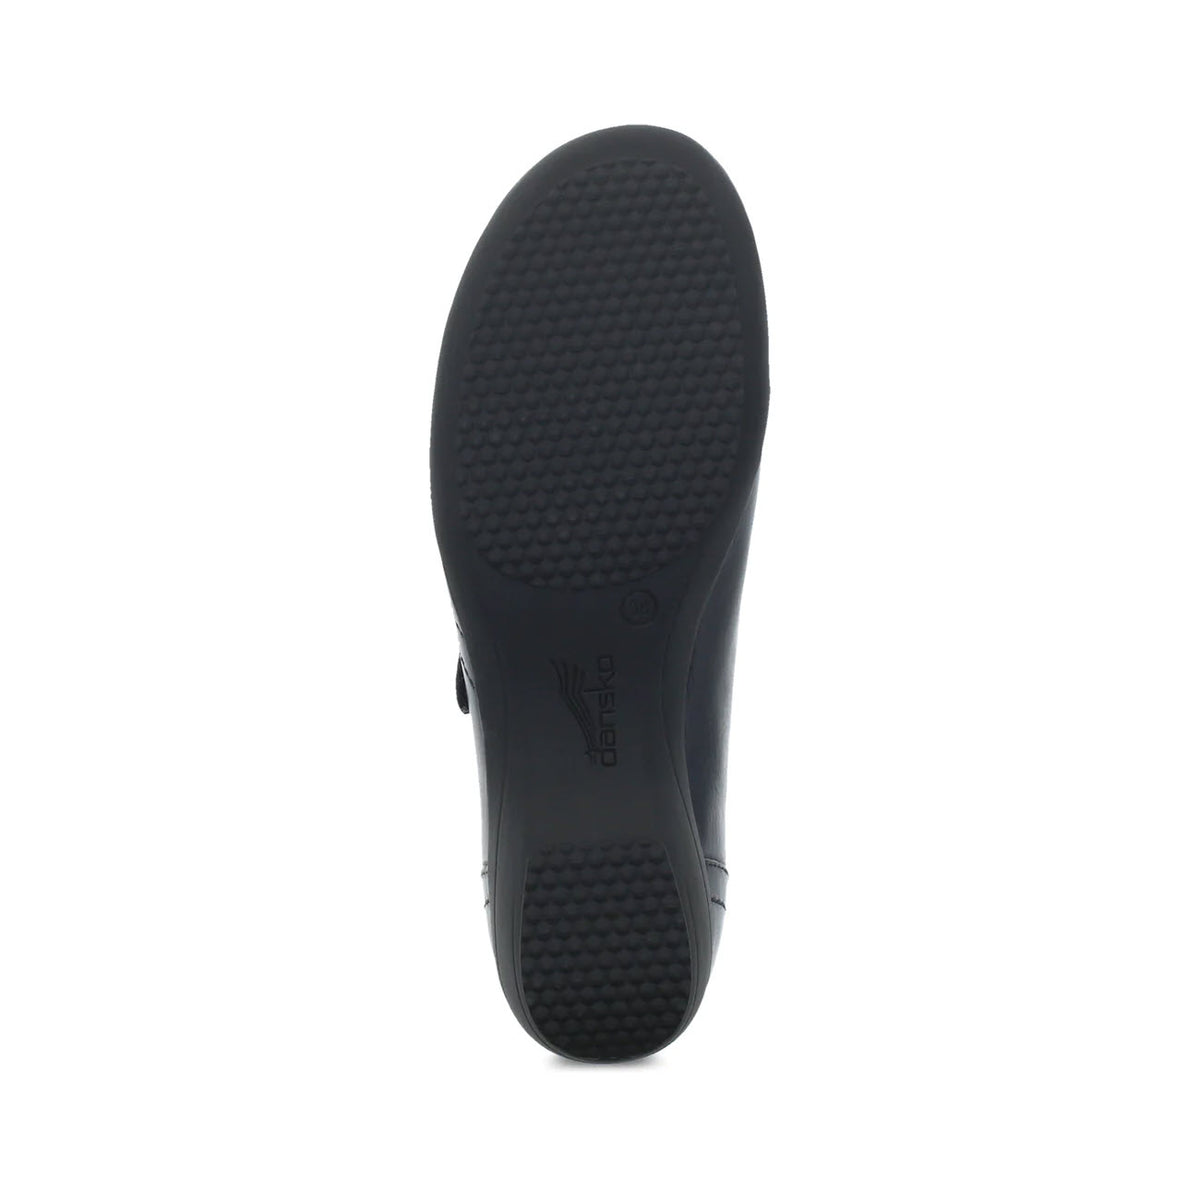 Bottom view of a Dansko Franny navy burnished ballet flat shoe showing a textured sole with arch support and the Dansko logo.